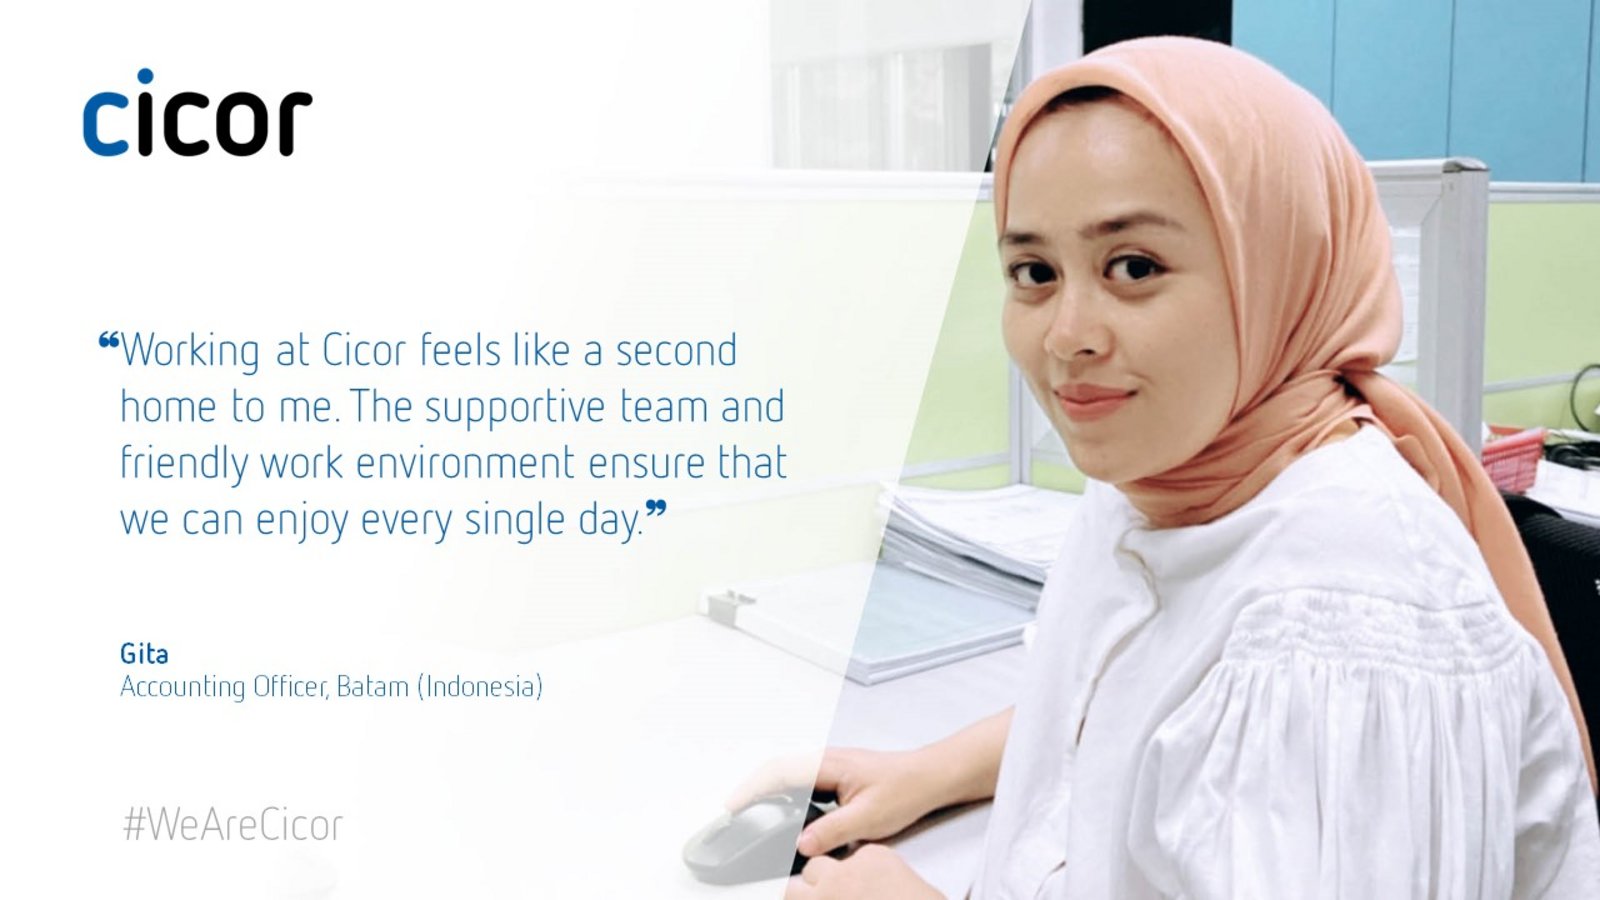 Testimonial of Gita who works at the Cicor site in Batam